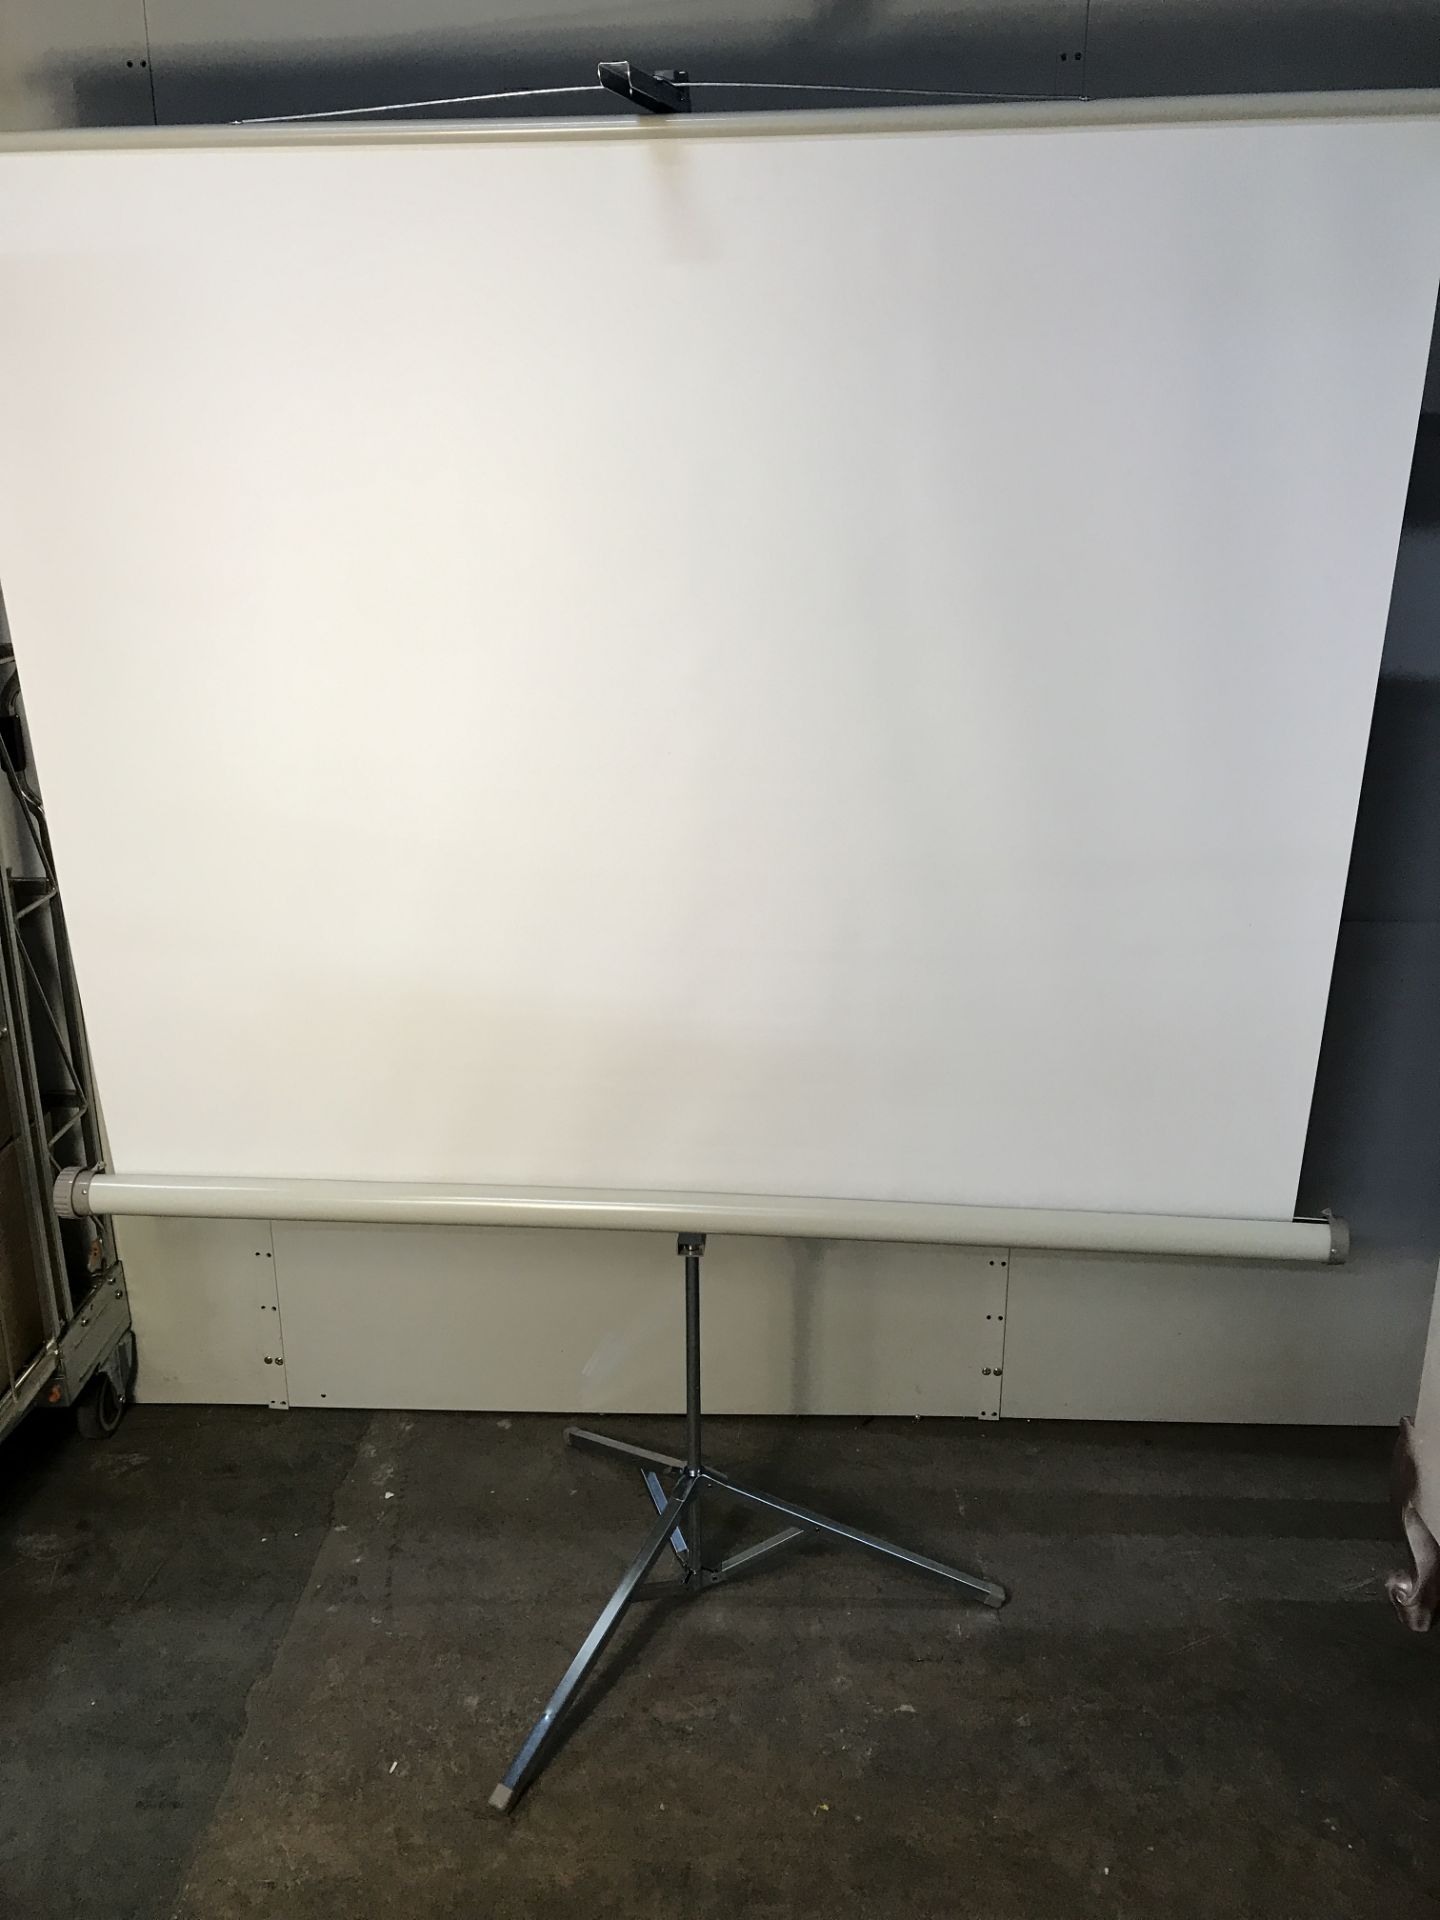 Collapsible Projector Screen With Stand